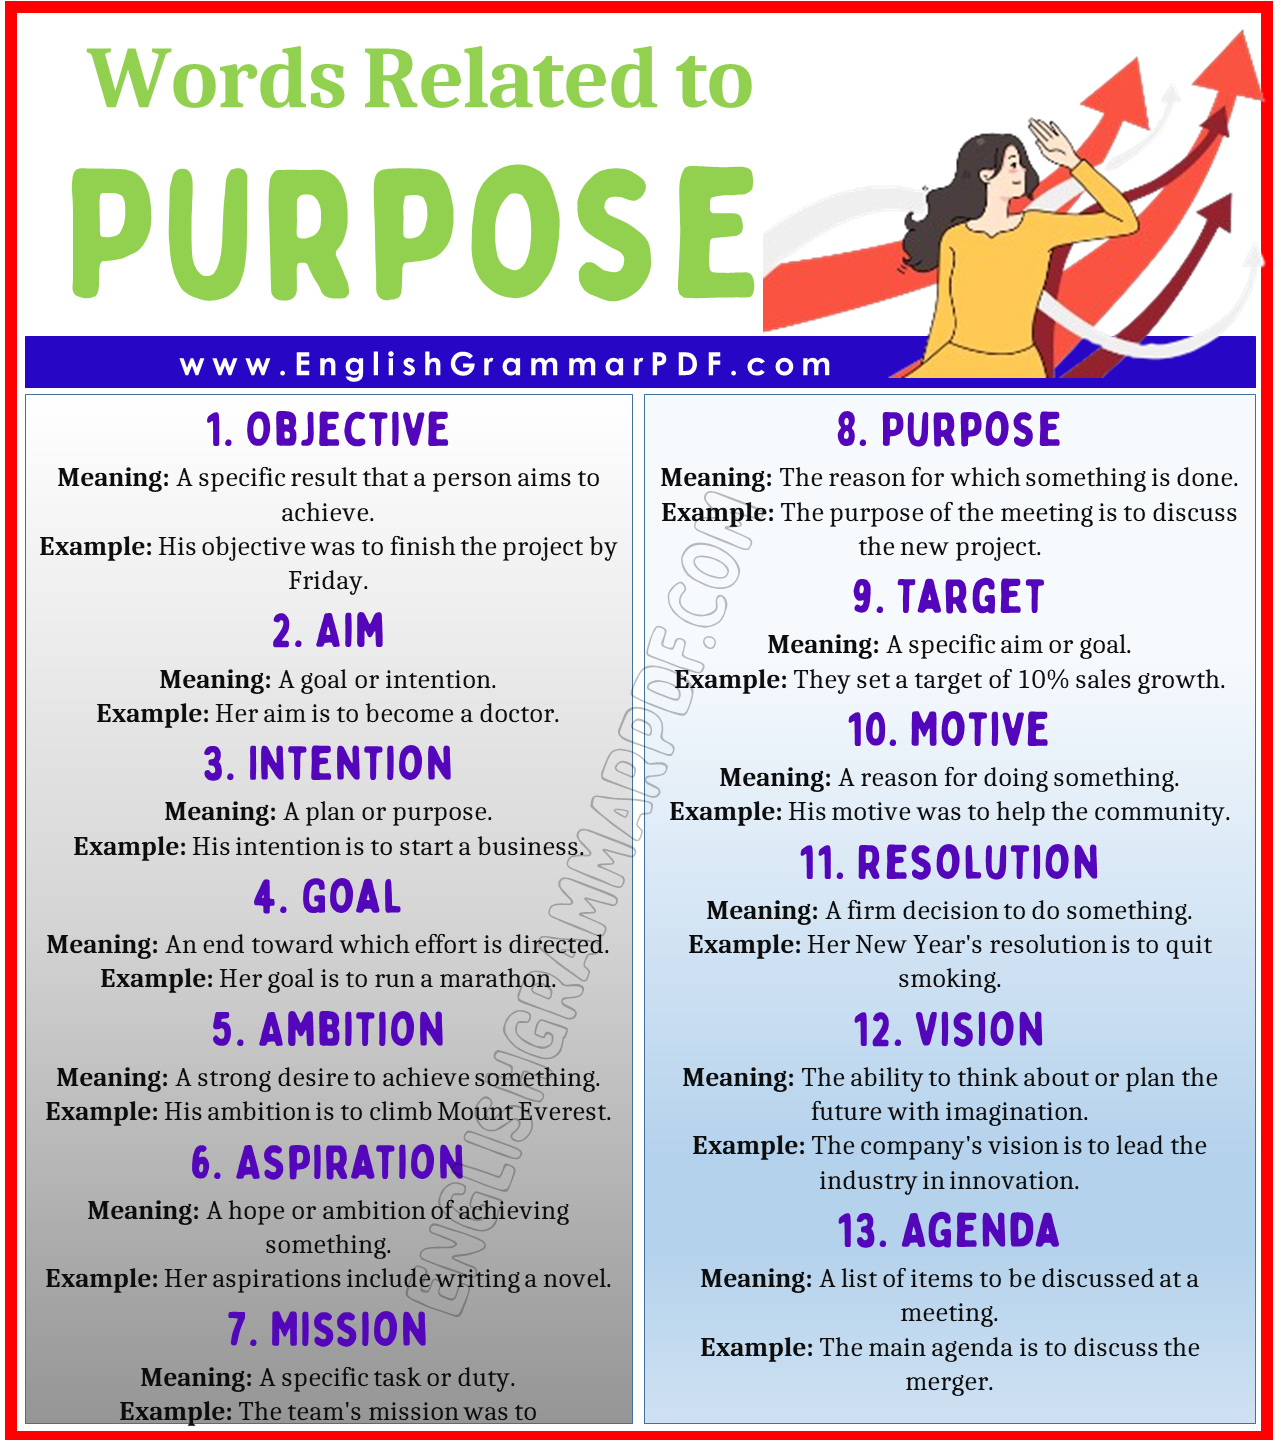 Vocabulary Words Related to Purpose